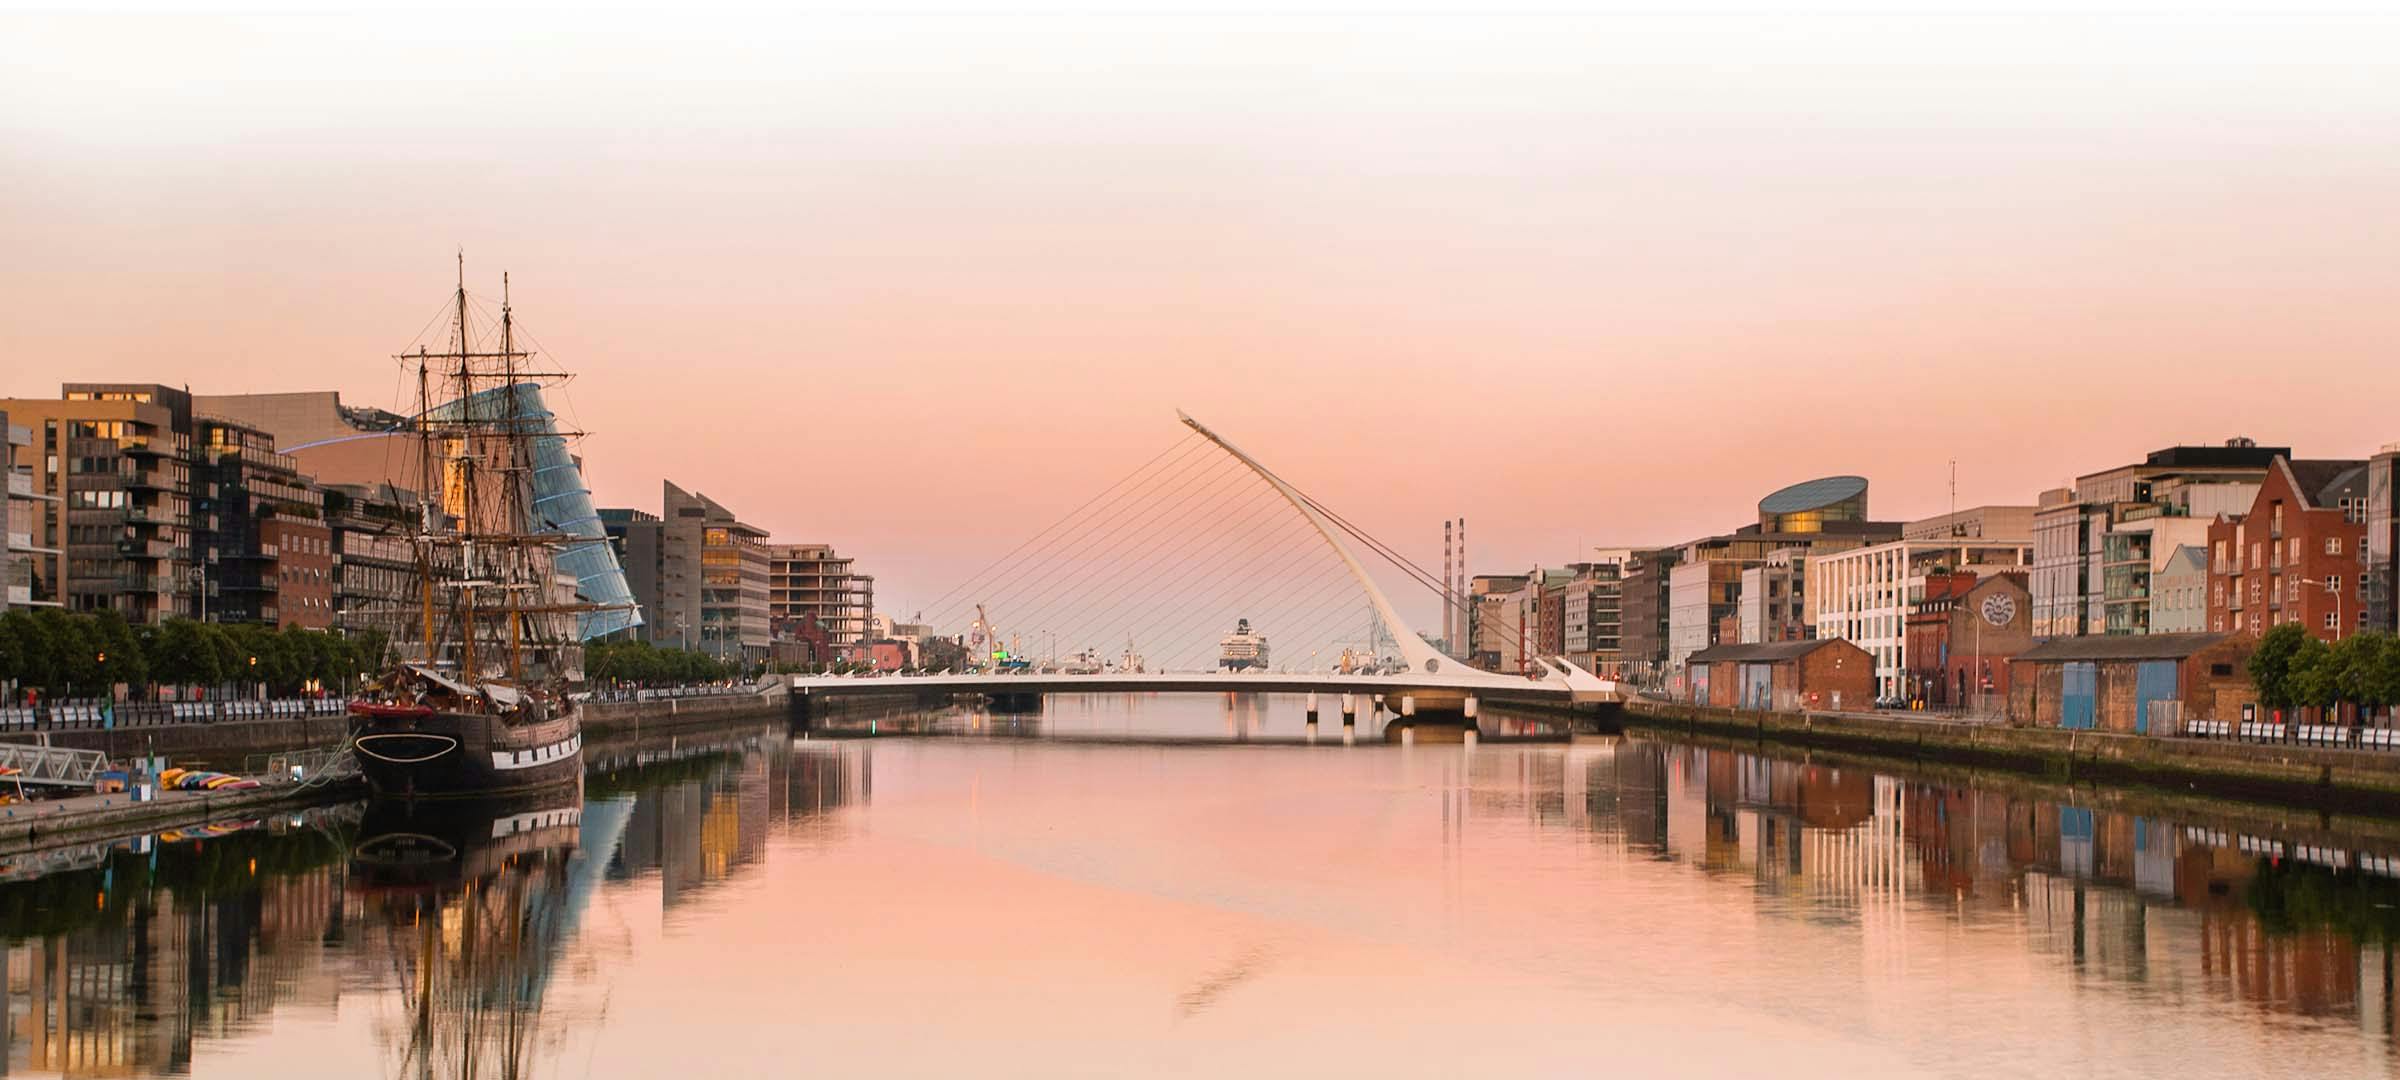 Skyline view of the city of Dublin